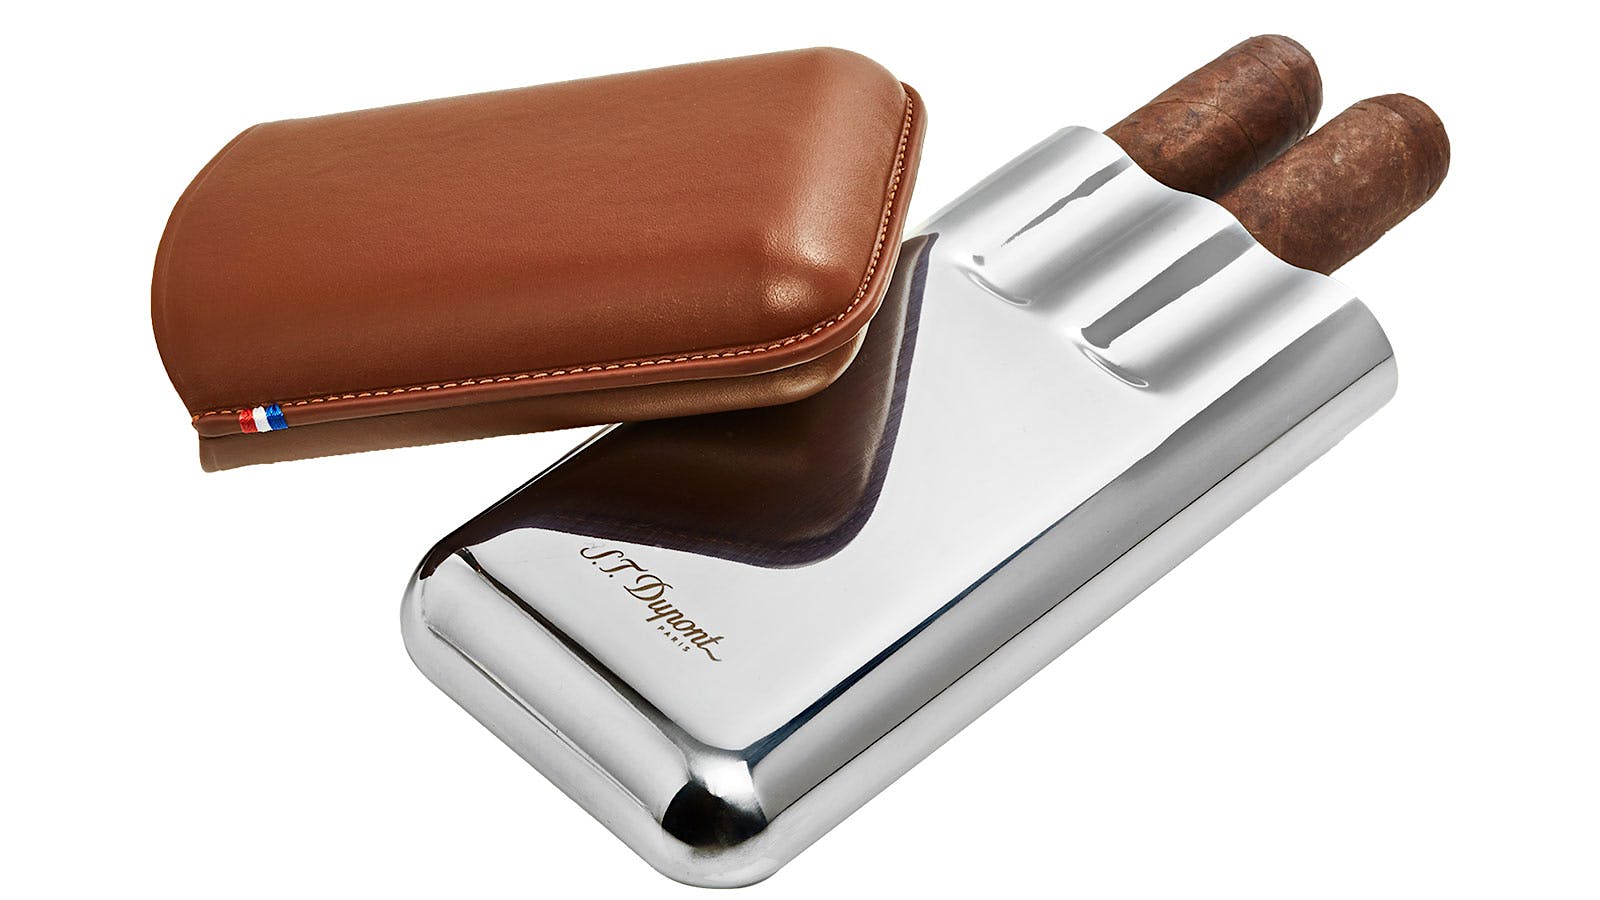 Visually striking and durable, S.T. Dupont’s Triple Cigar Case is made from rich brown calfskin and metal.